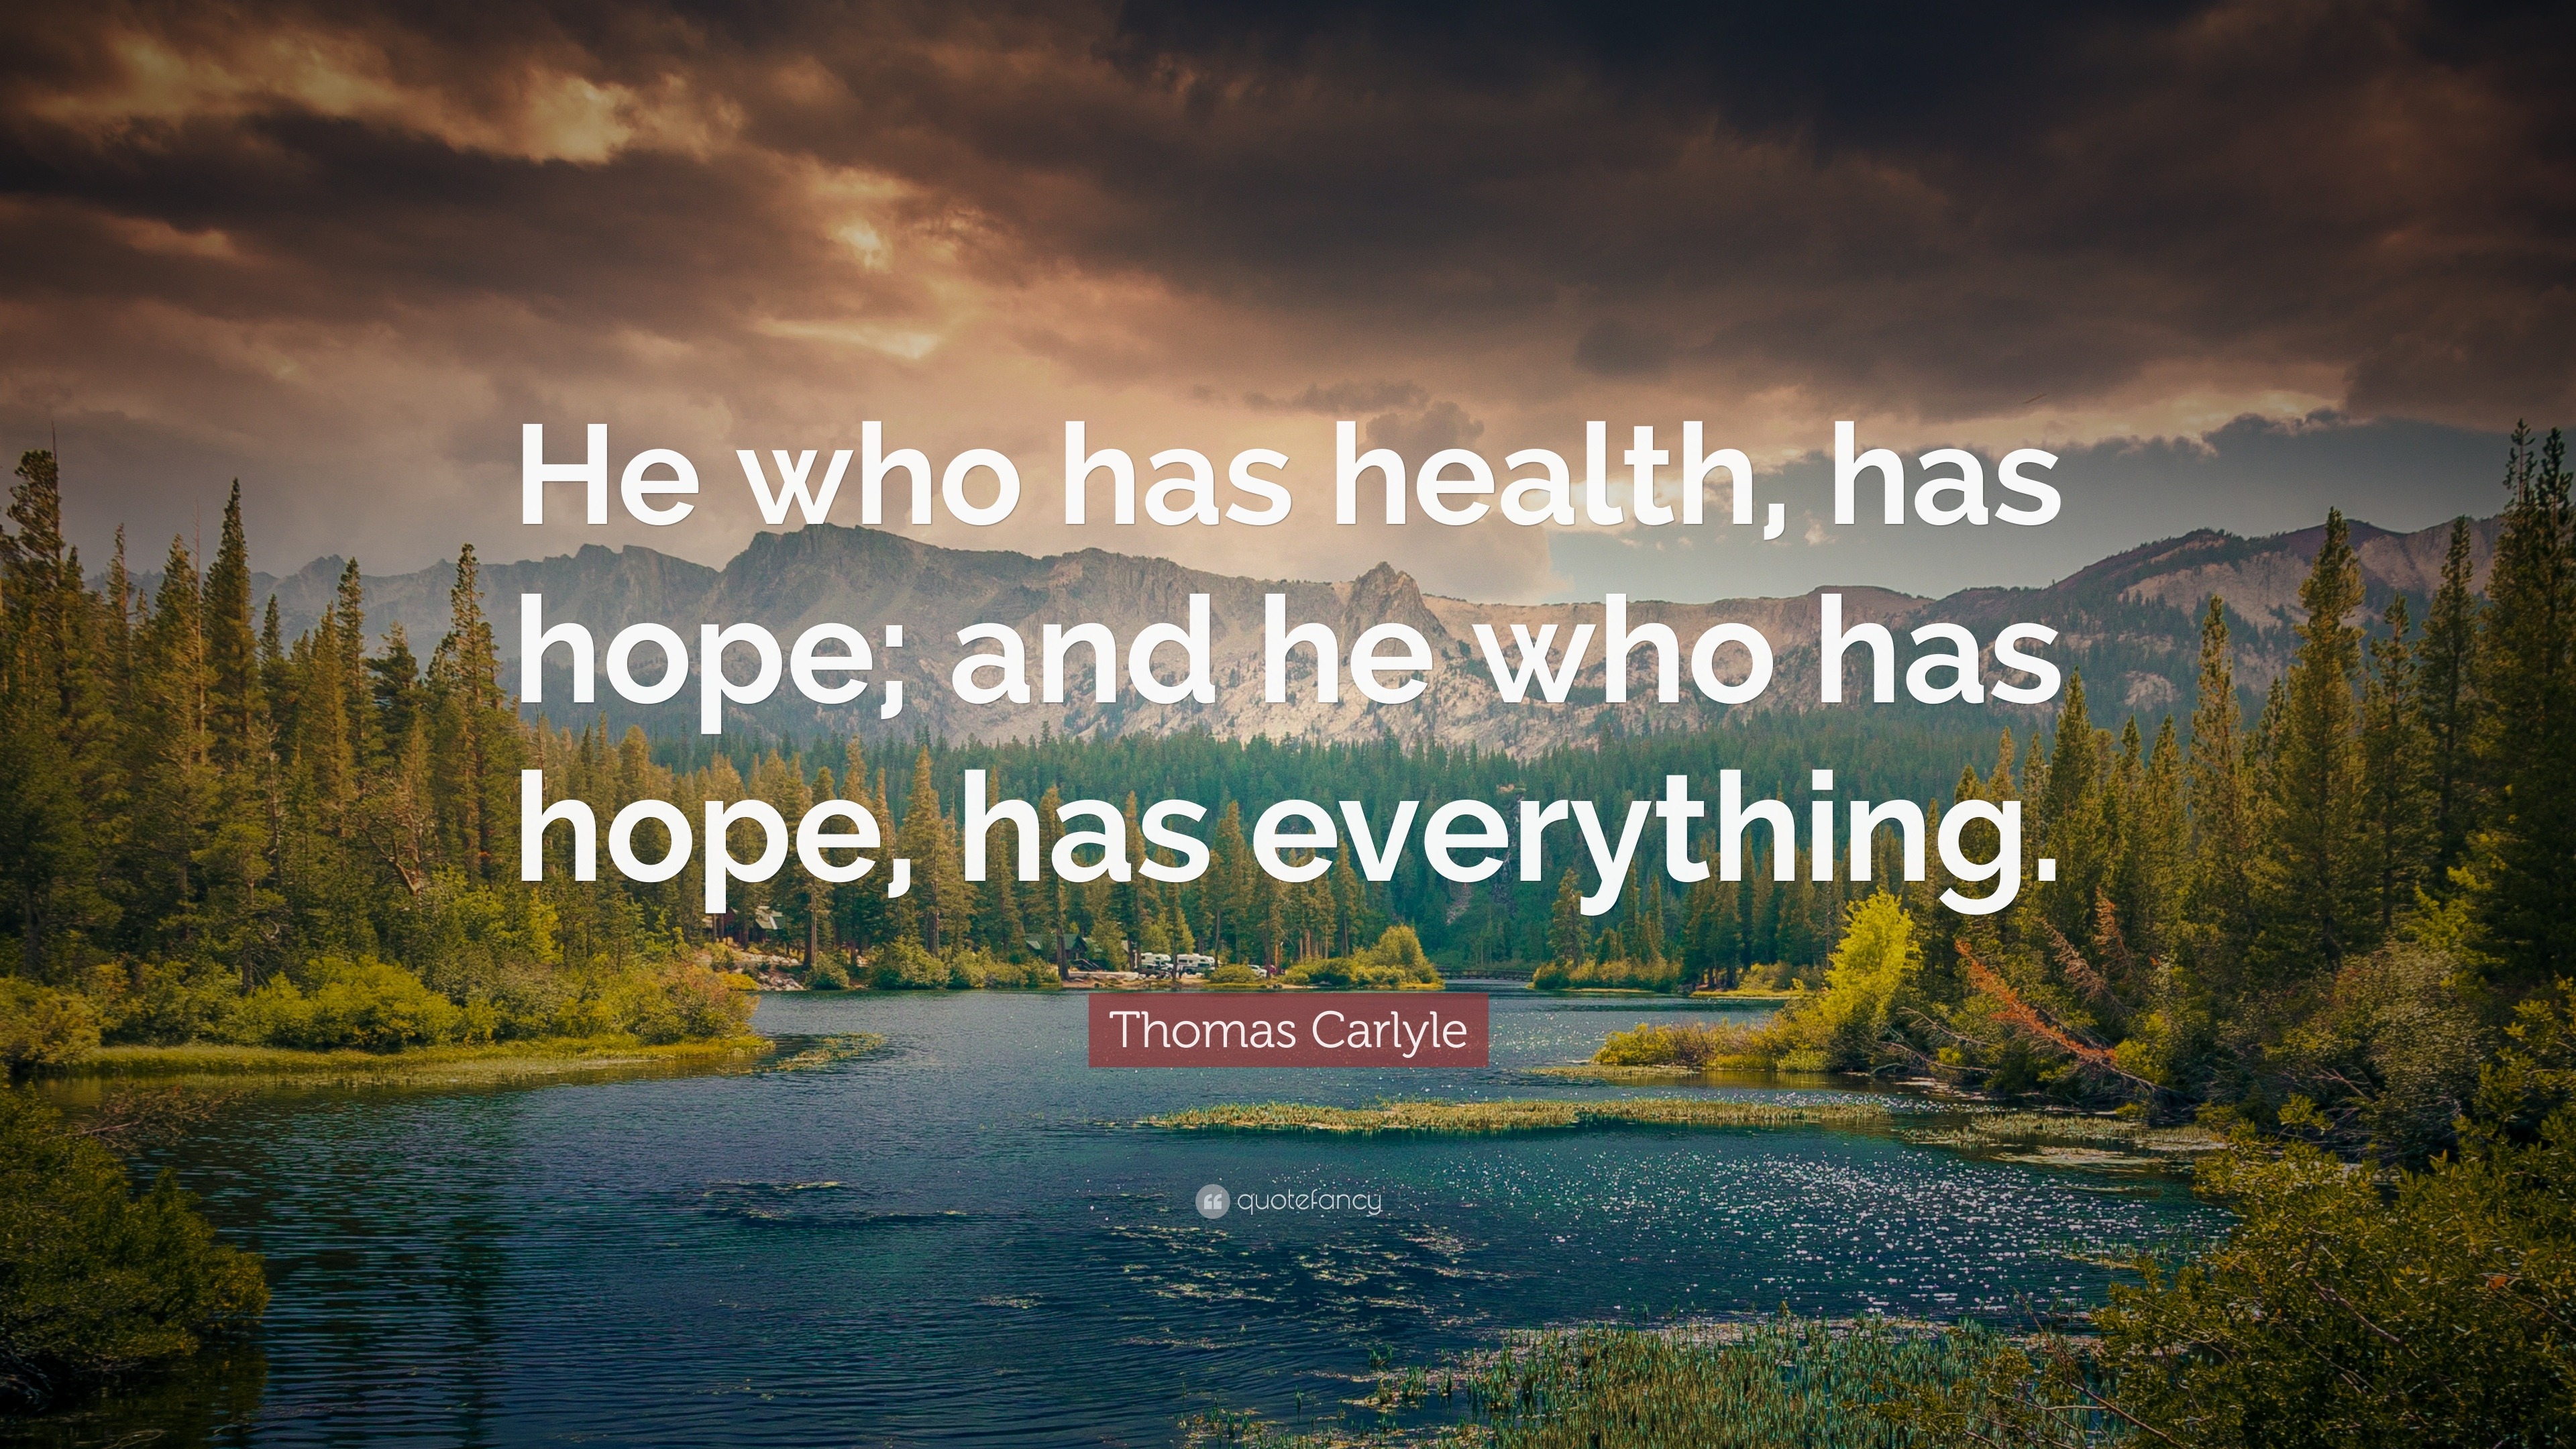 Thomas Carlyle Quote: “He who has health, has hope; and he who has hope